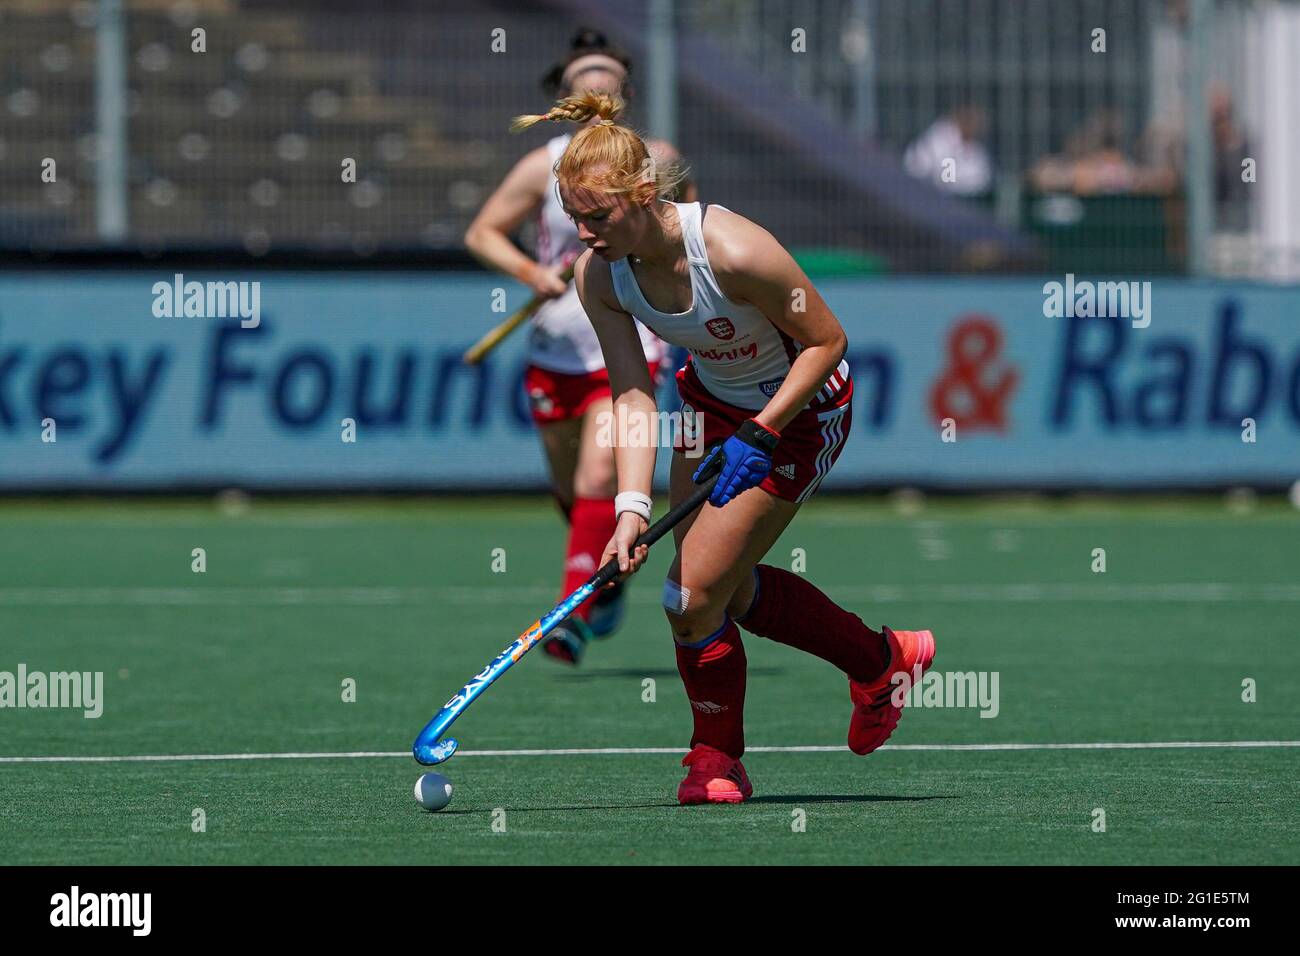 AMSTELVEEN, NETHERLANDS - JUNE 6: Catherine Ledesma of England during the Euro Hockey Championships match between England and Italy at Wagener Stadion Stock Photo